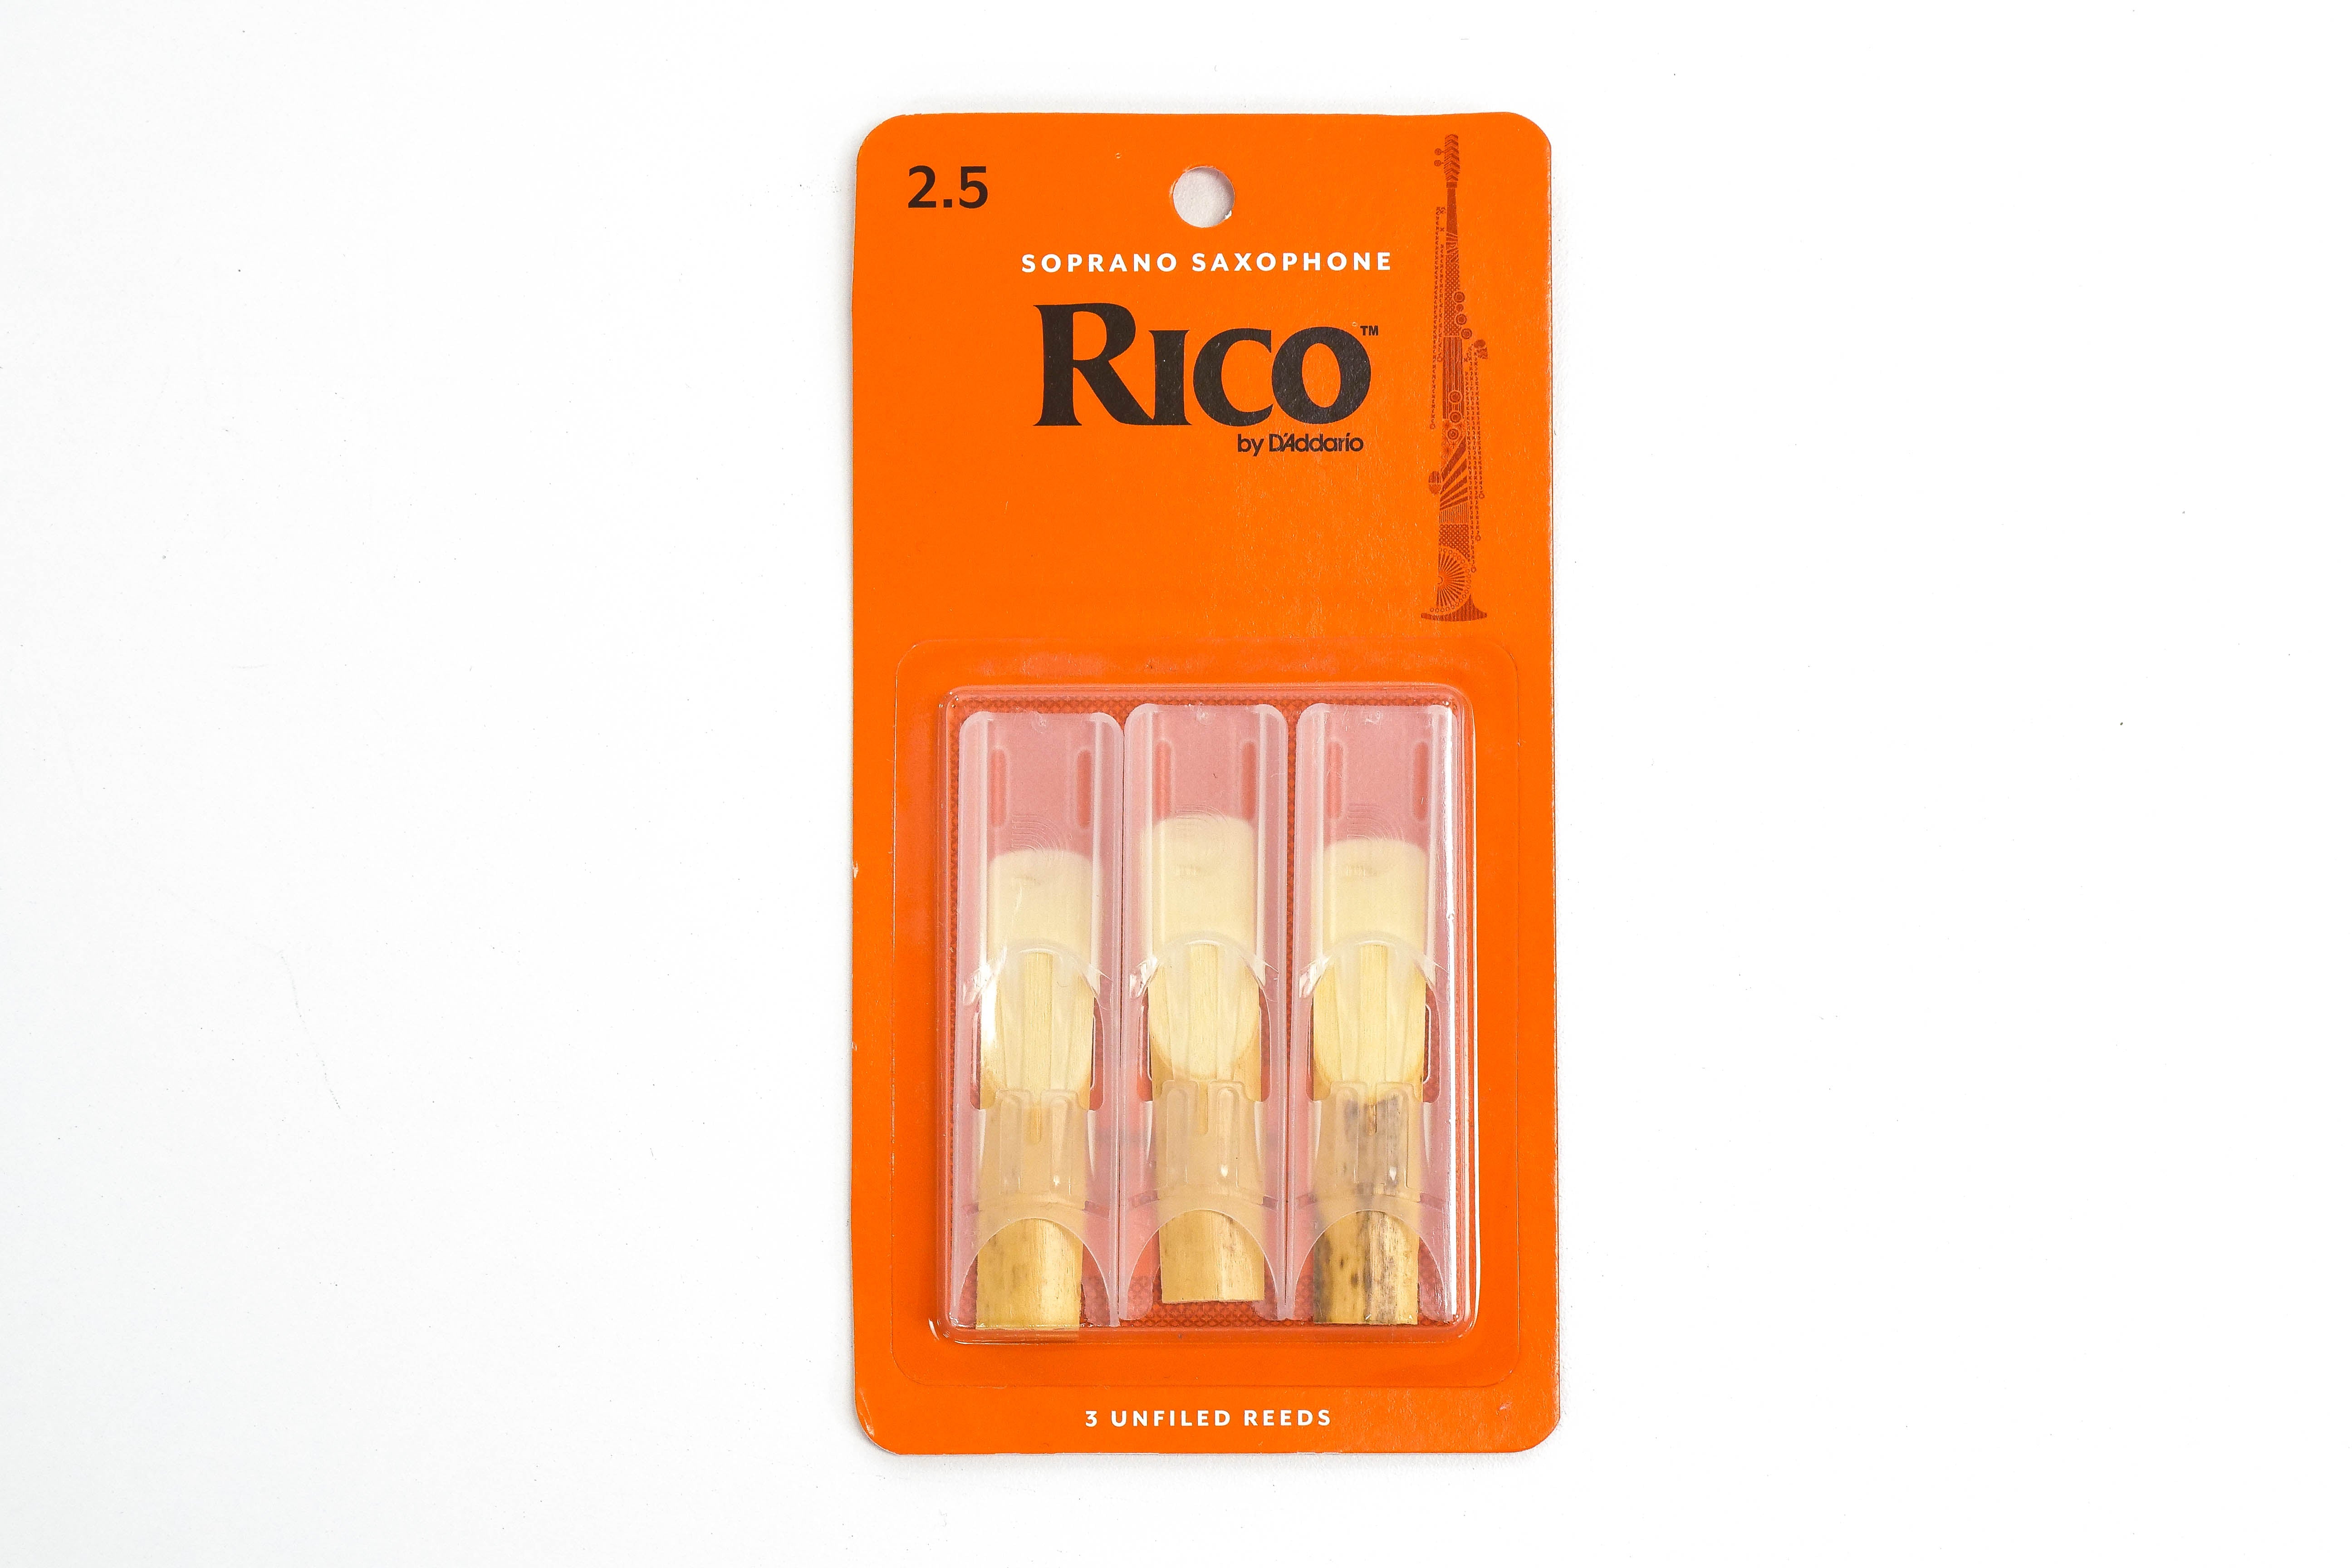 Rico by D'Addario Soprano Saxophone Reeds Strength 2.5 - 3 Pack